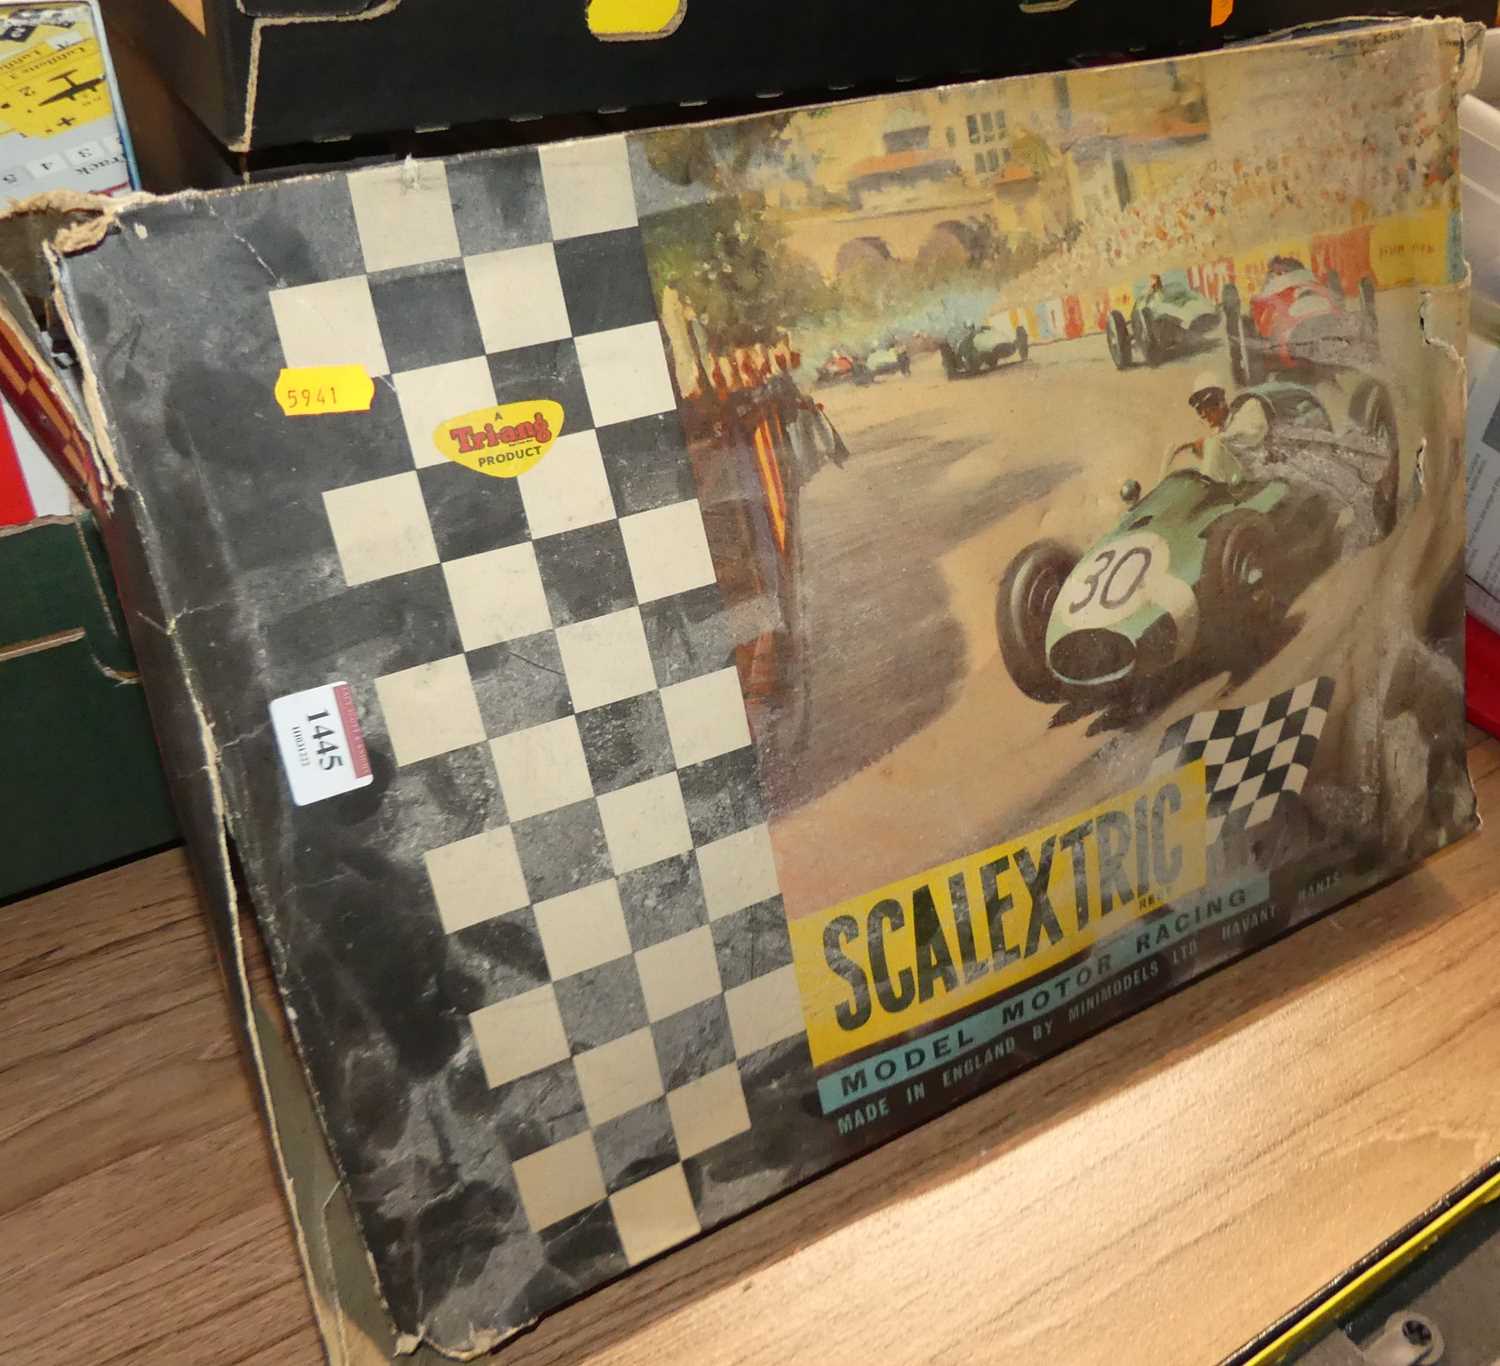 A Scalextric no 50 boxed gift set housed in the original heavily worn box - Bild 3 aus 3